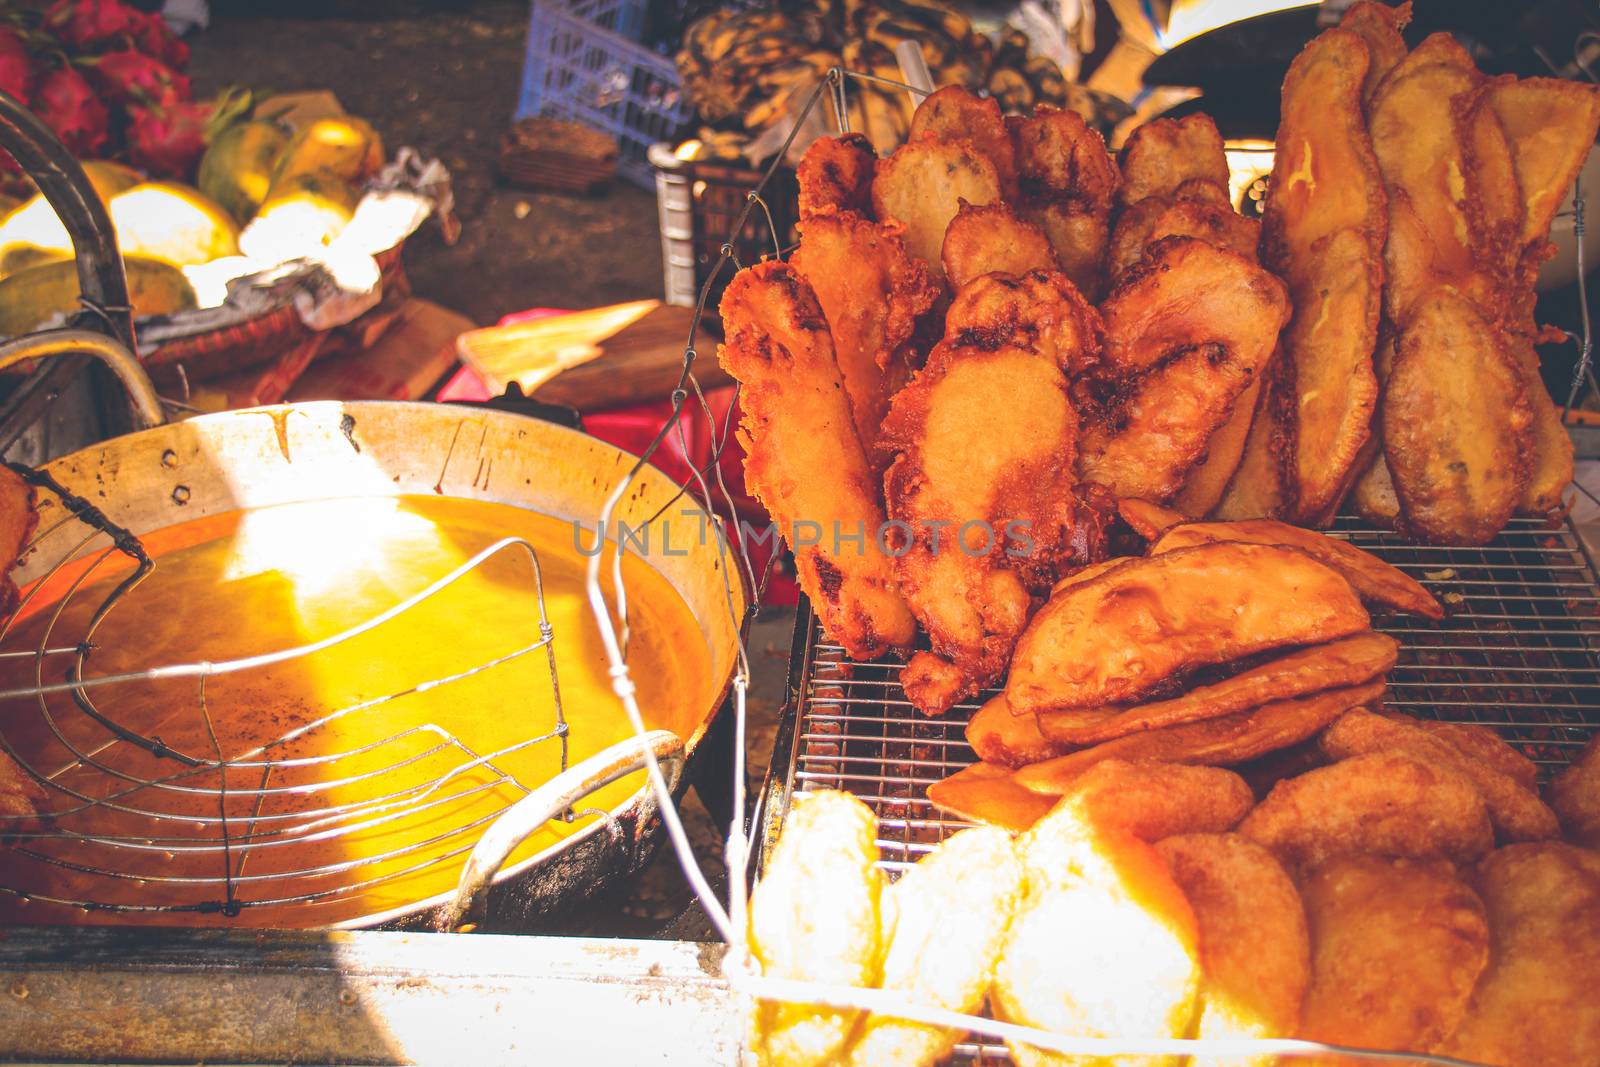 Bánh cay or Vietnamese cassava and corn fritter, a popular street food in the south of Vietnam